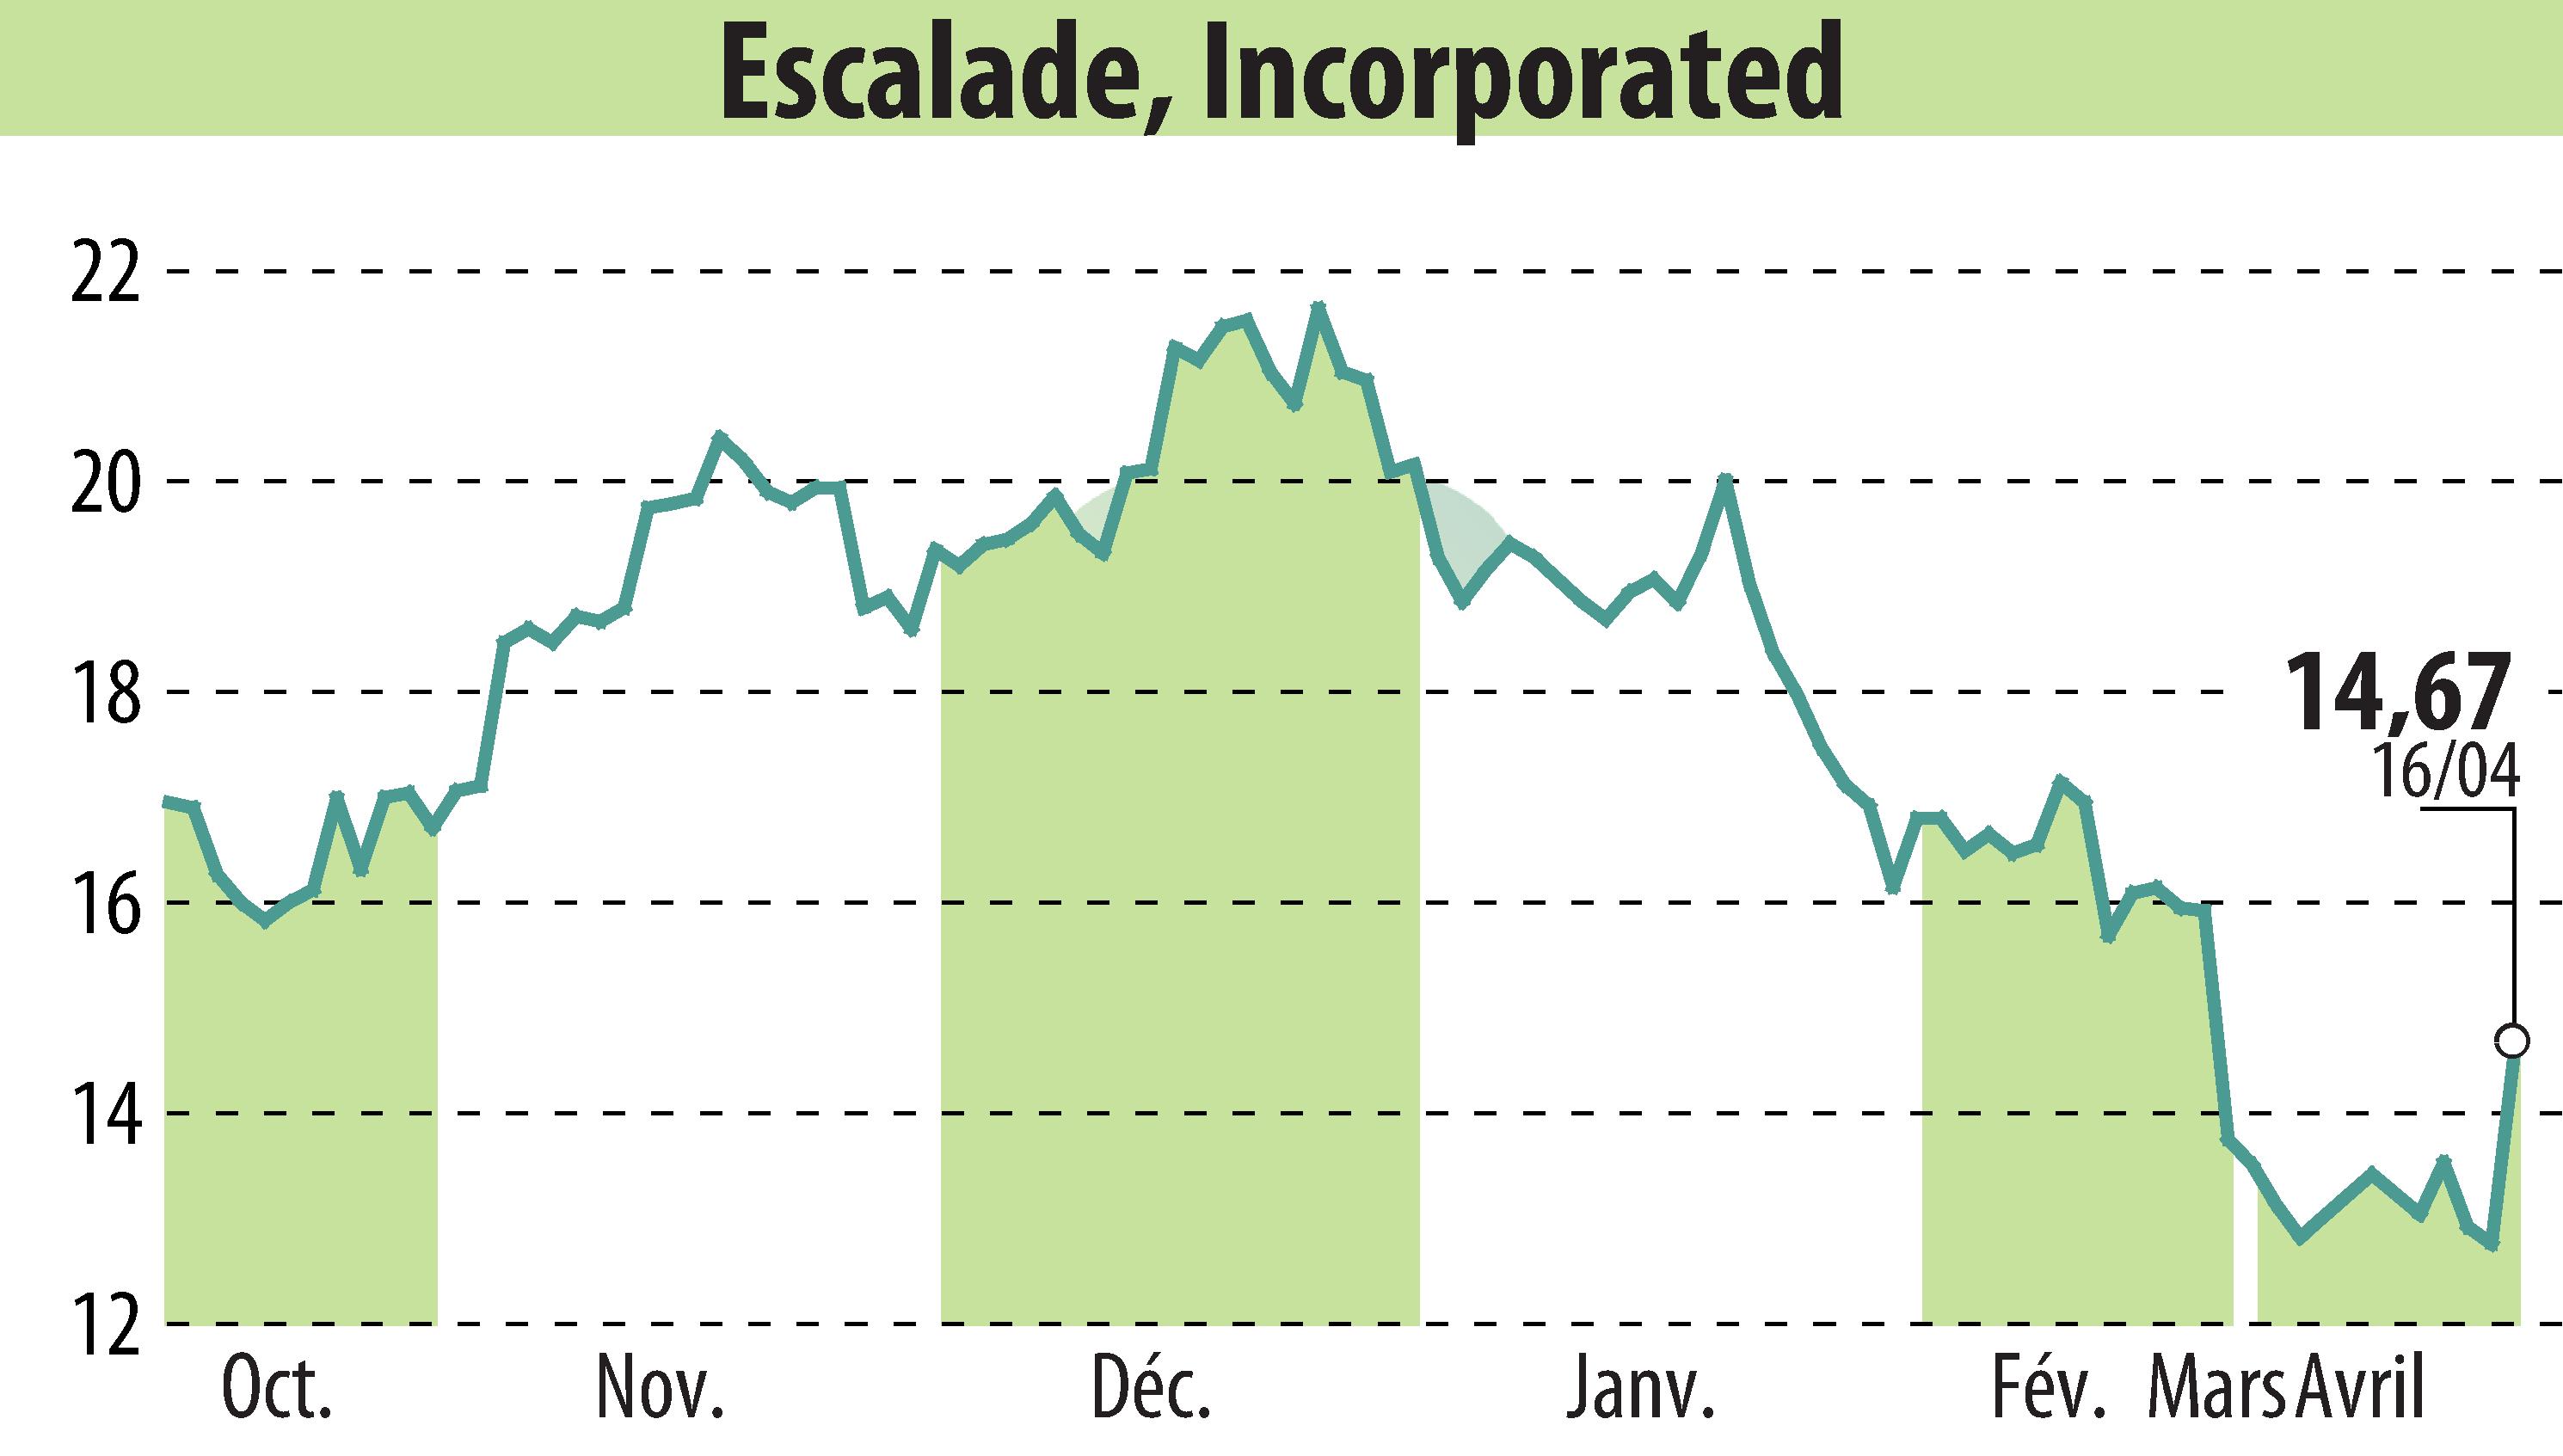 Stock price chart of Escalade Sports (EBR:ESCA) showing fluctuations.